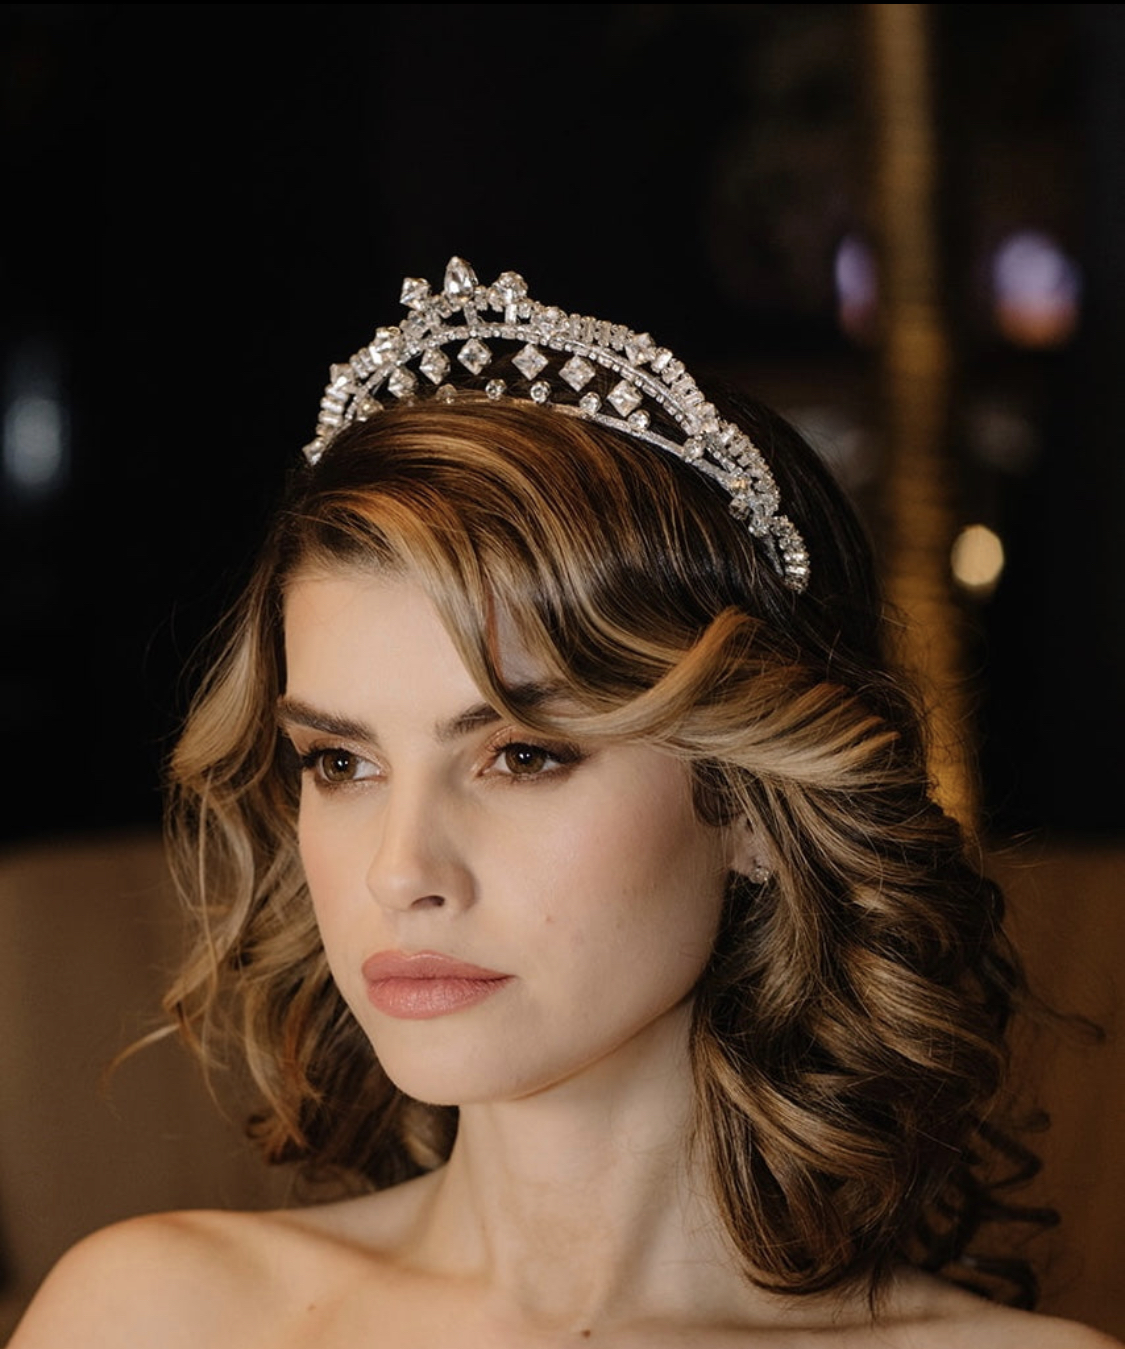 Camille Headpieces - Independent UK bridal designs